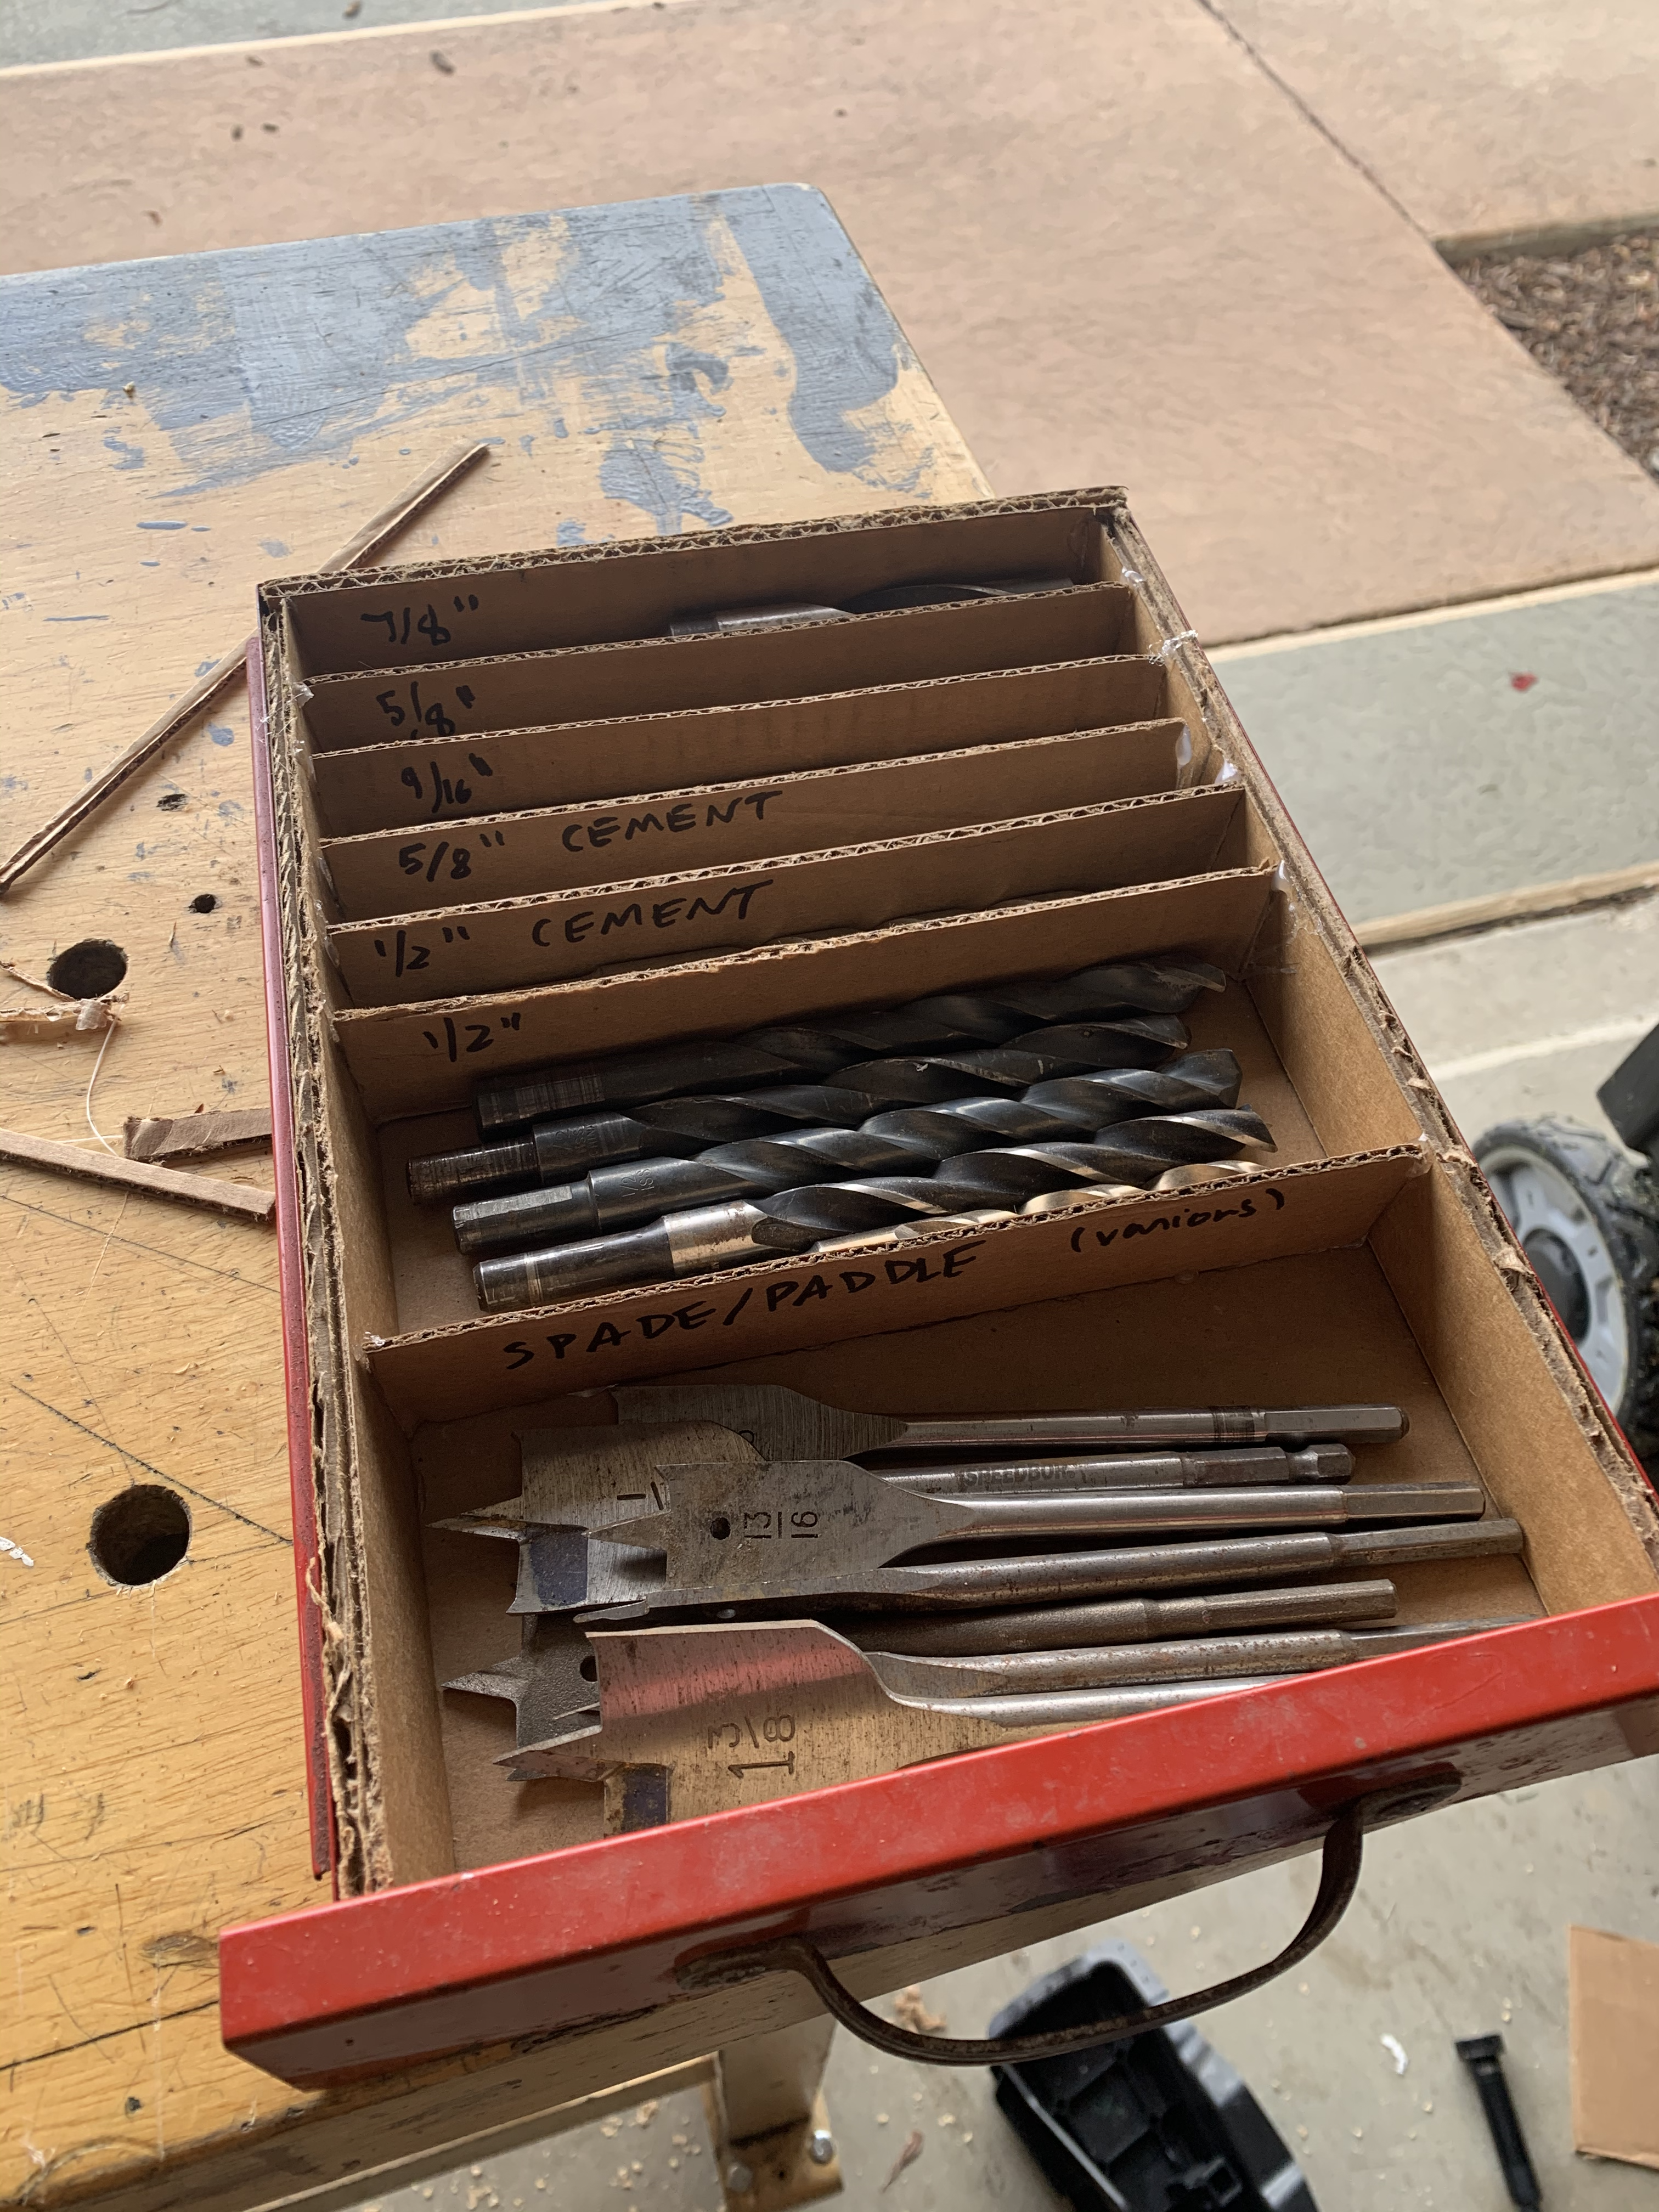 organization of drill bits in tool chest